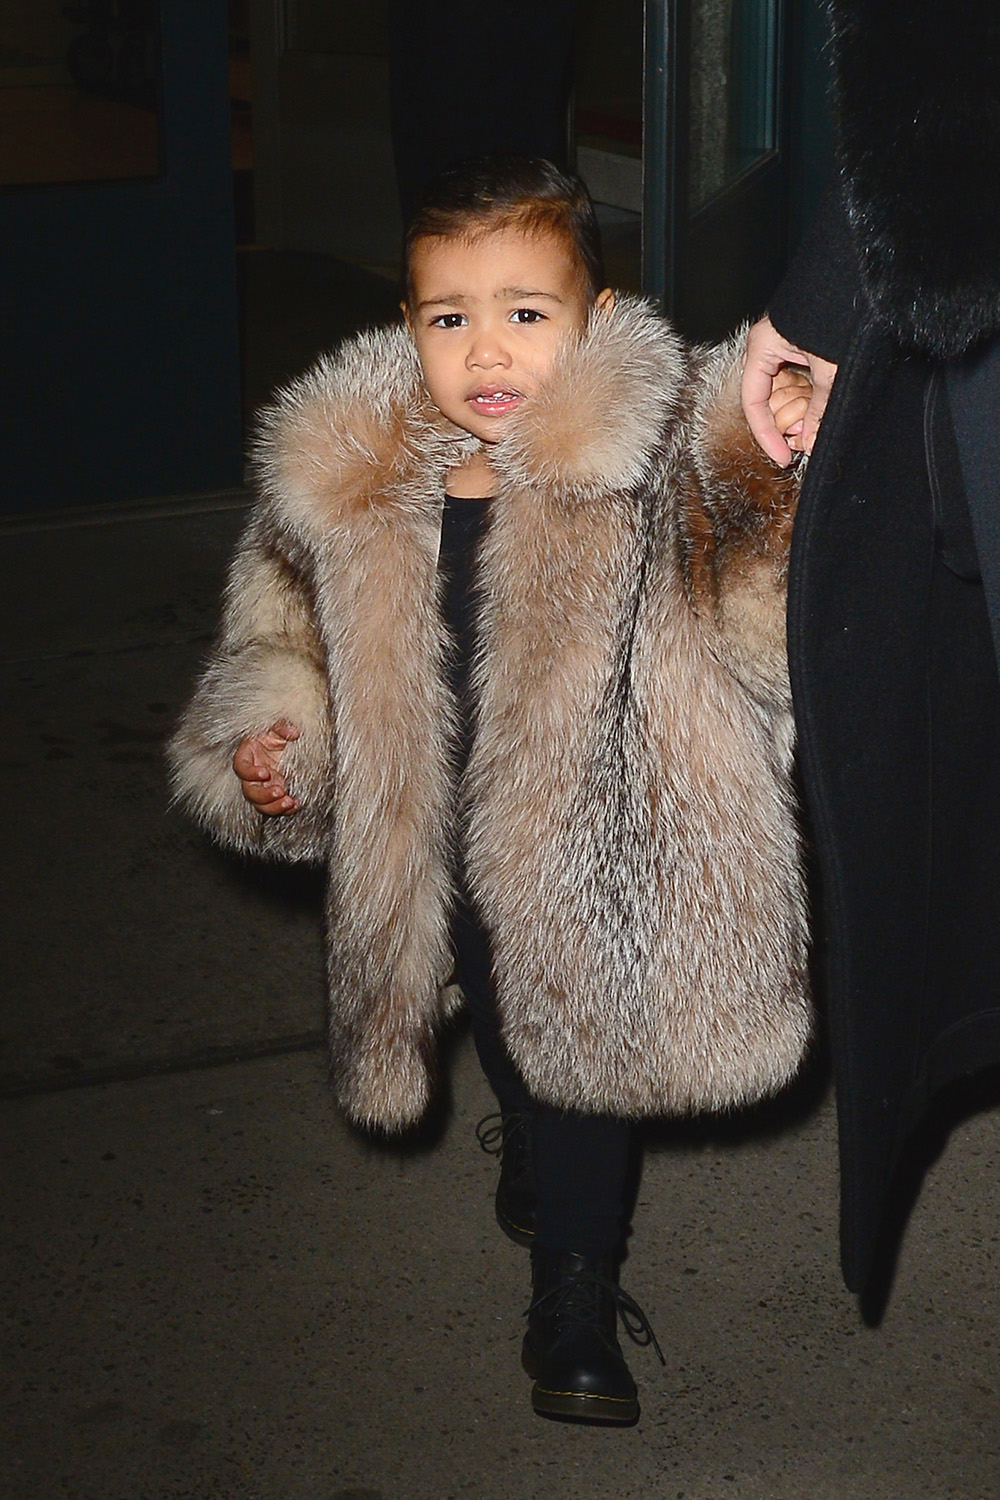 Don't you know that the only thing to wear in New York is fur, February 2015.